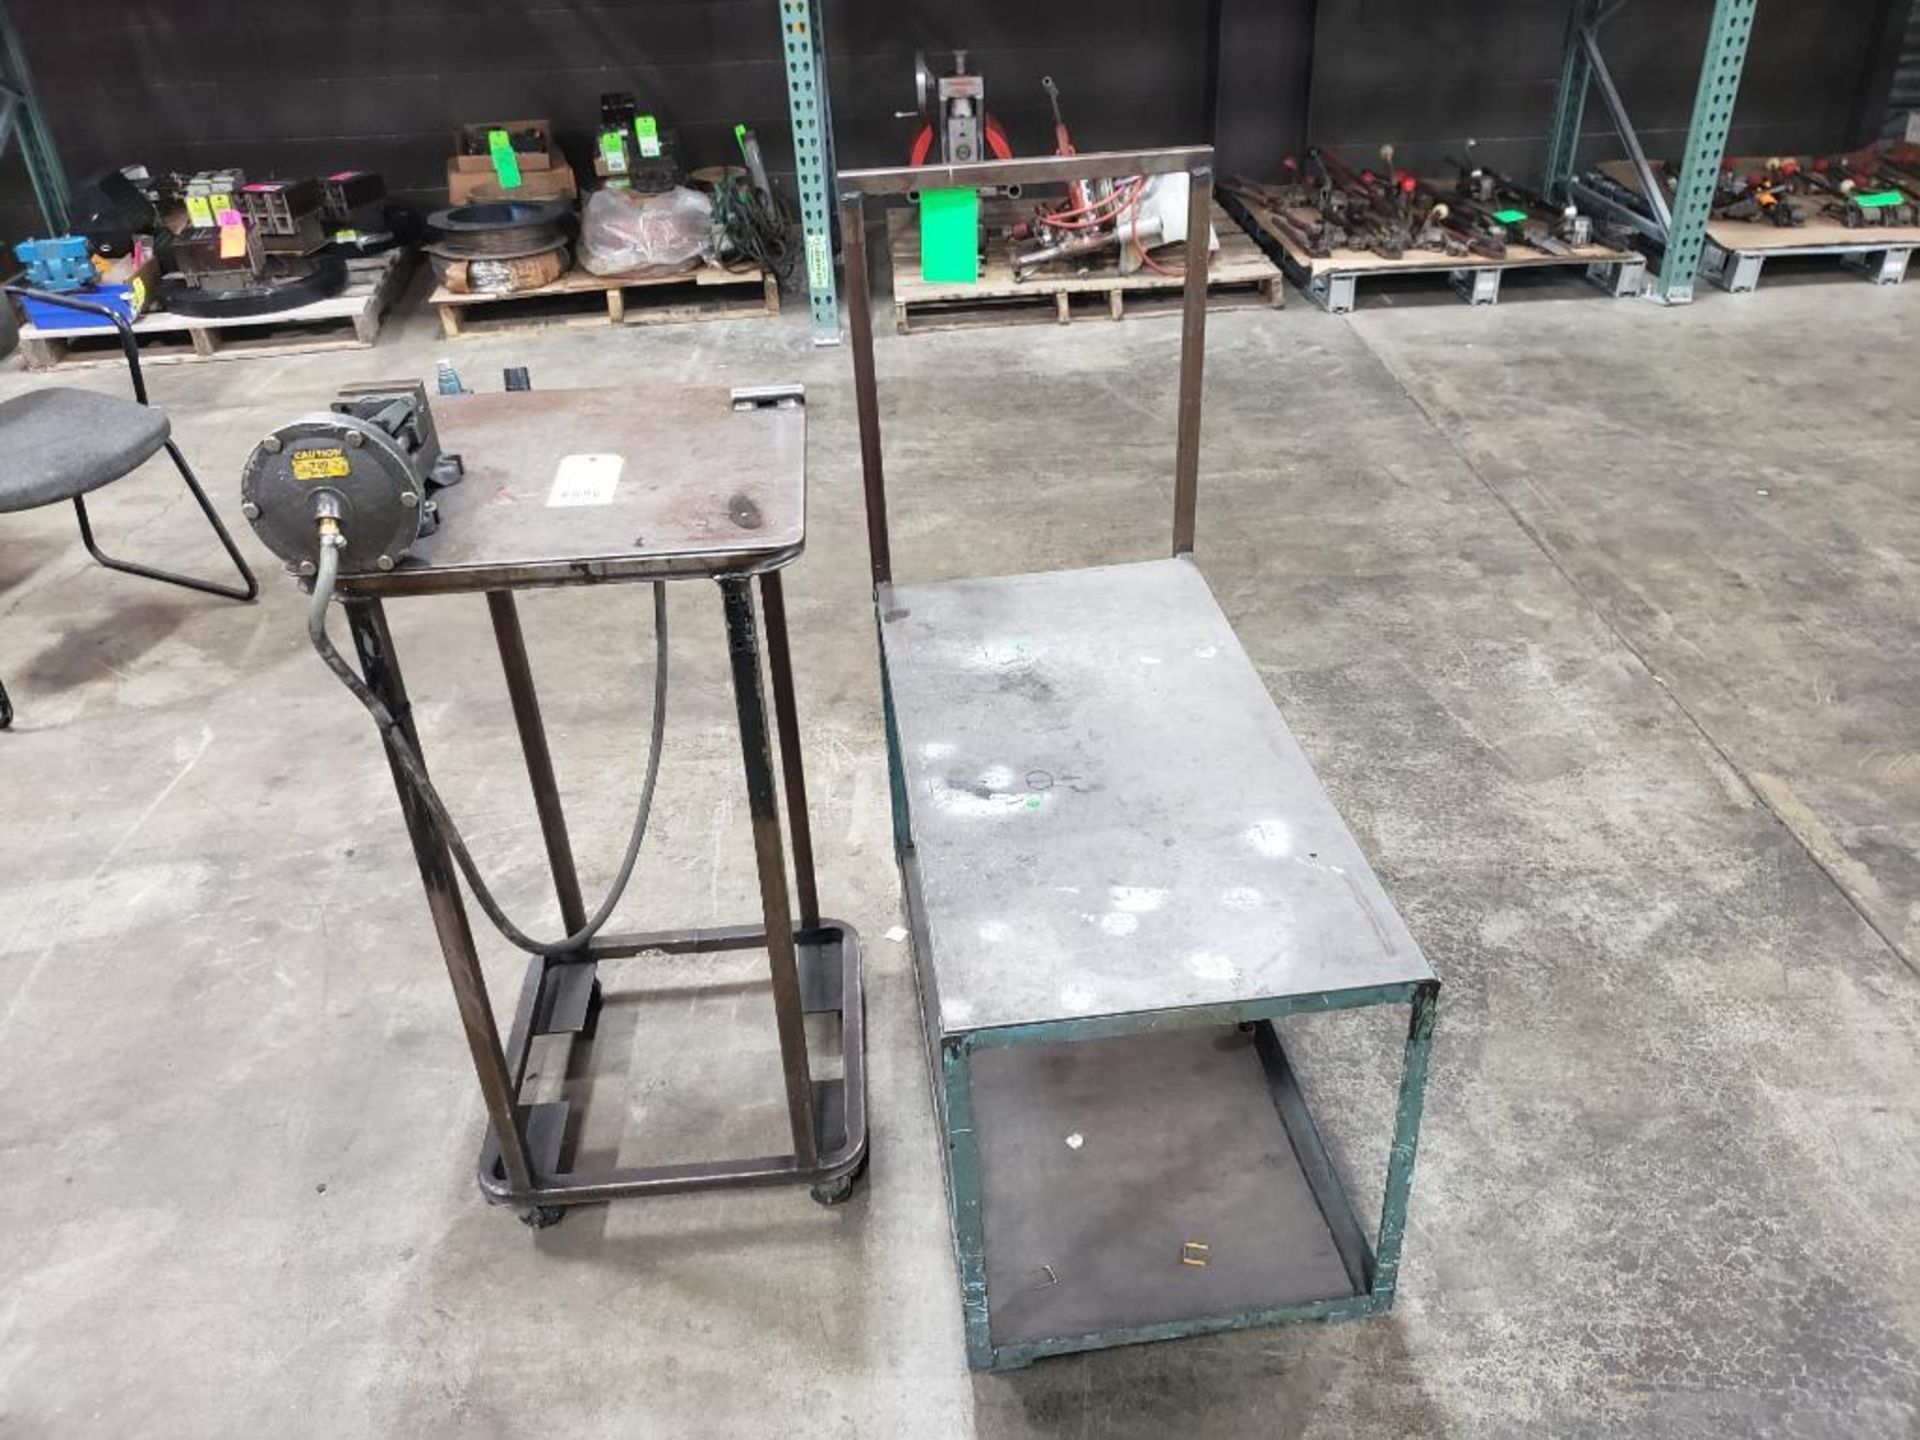 Qty 2 - Industrial work carts. 22x18x40, 17x36x42. LxWxH. One with pneumatic clamp fixture.